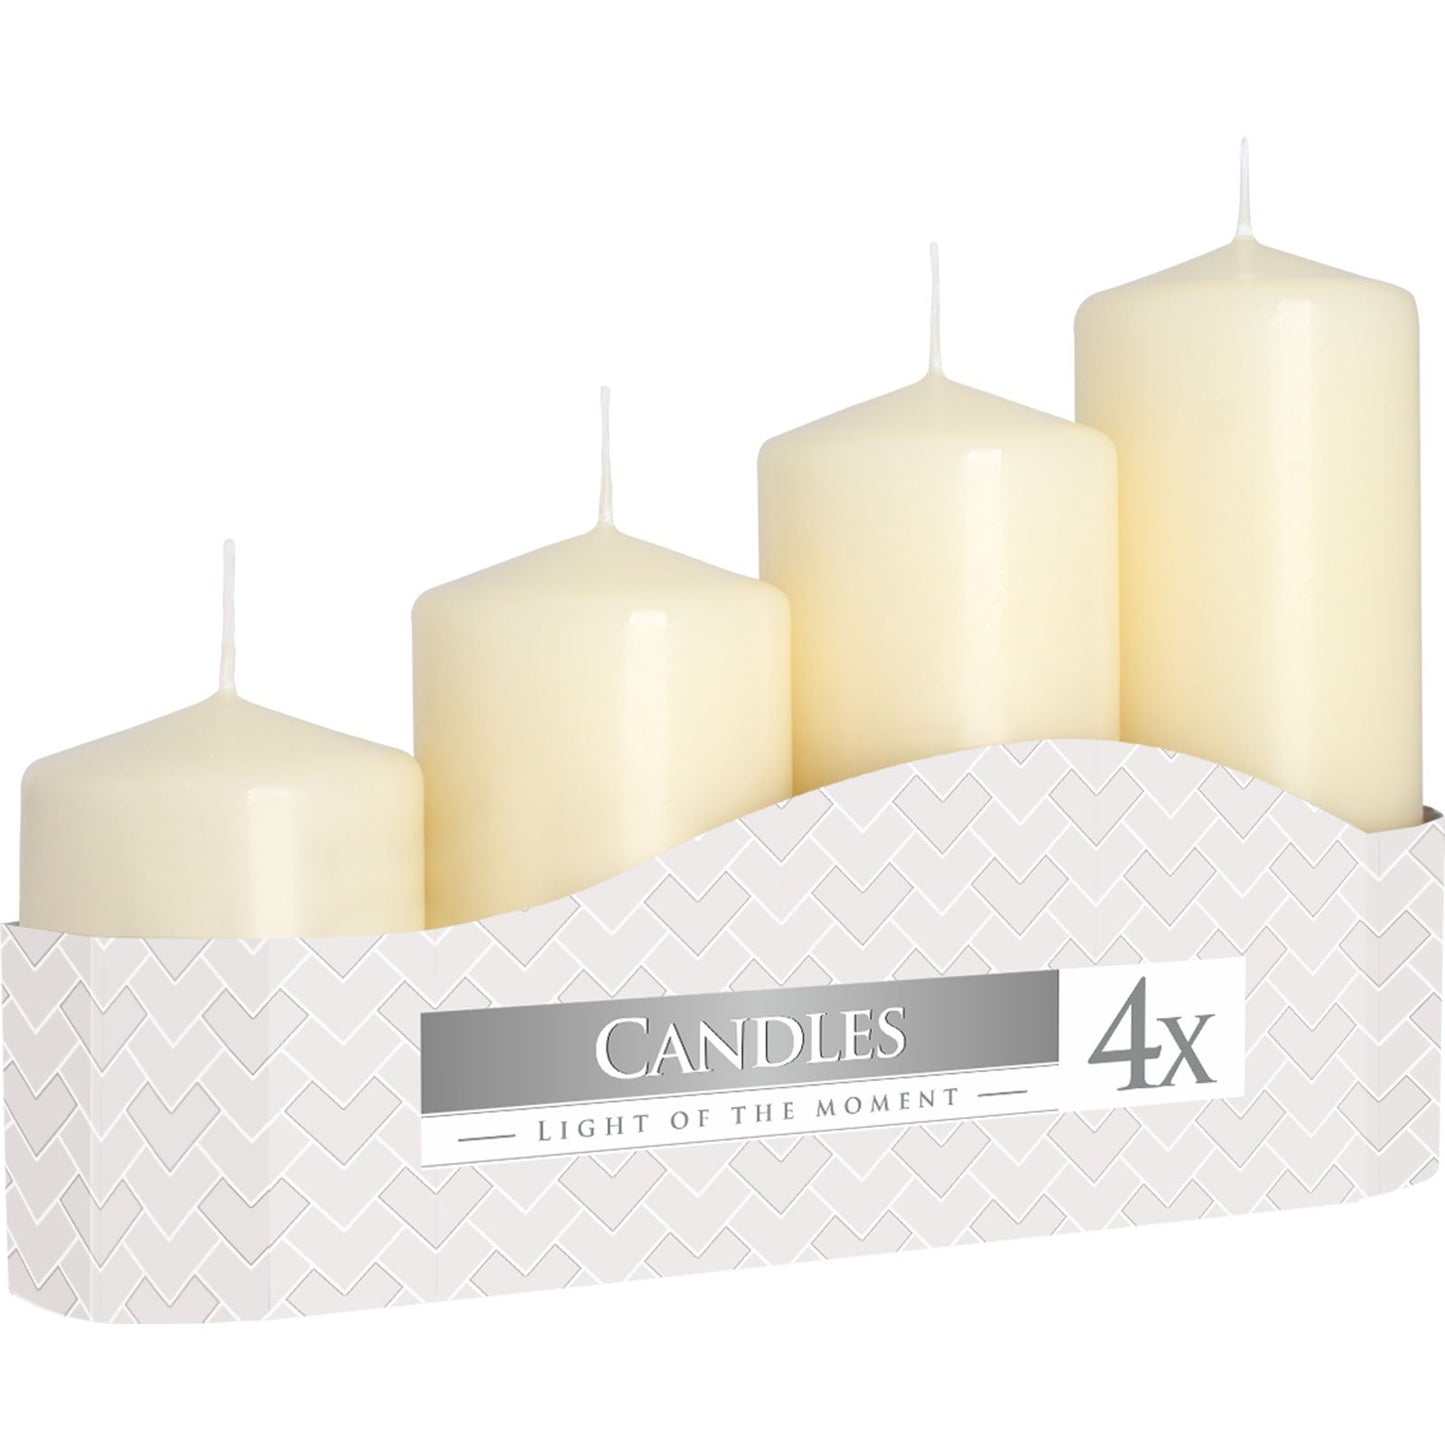 Set of 4 Pillar Candles 50mm (11/16/22/33H) - Ivory or Red - ShopGreenToday